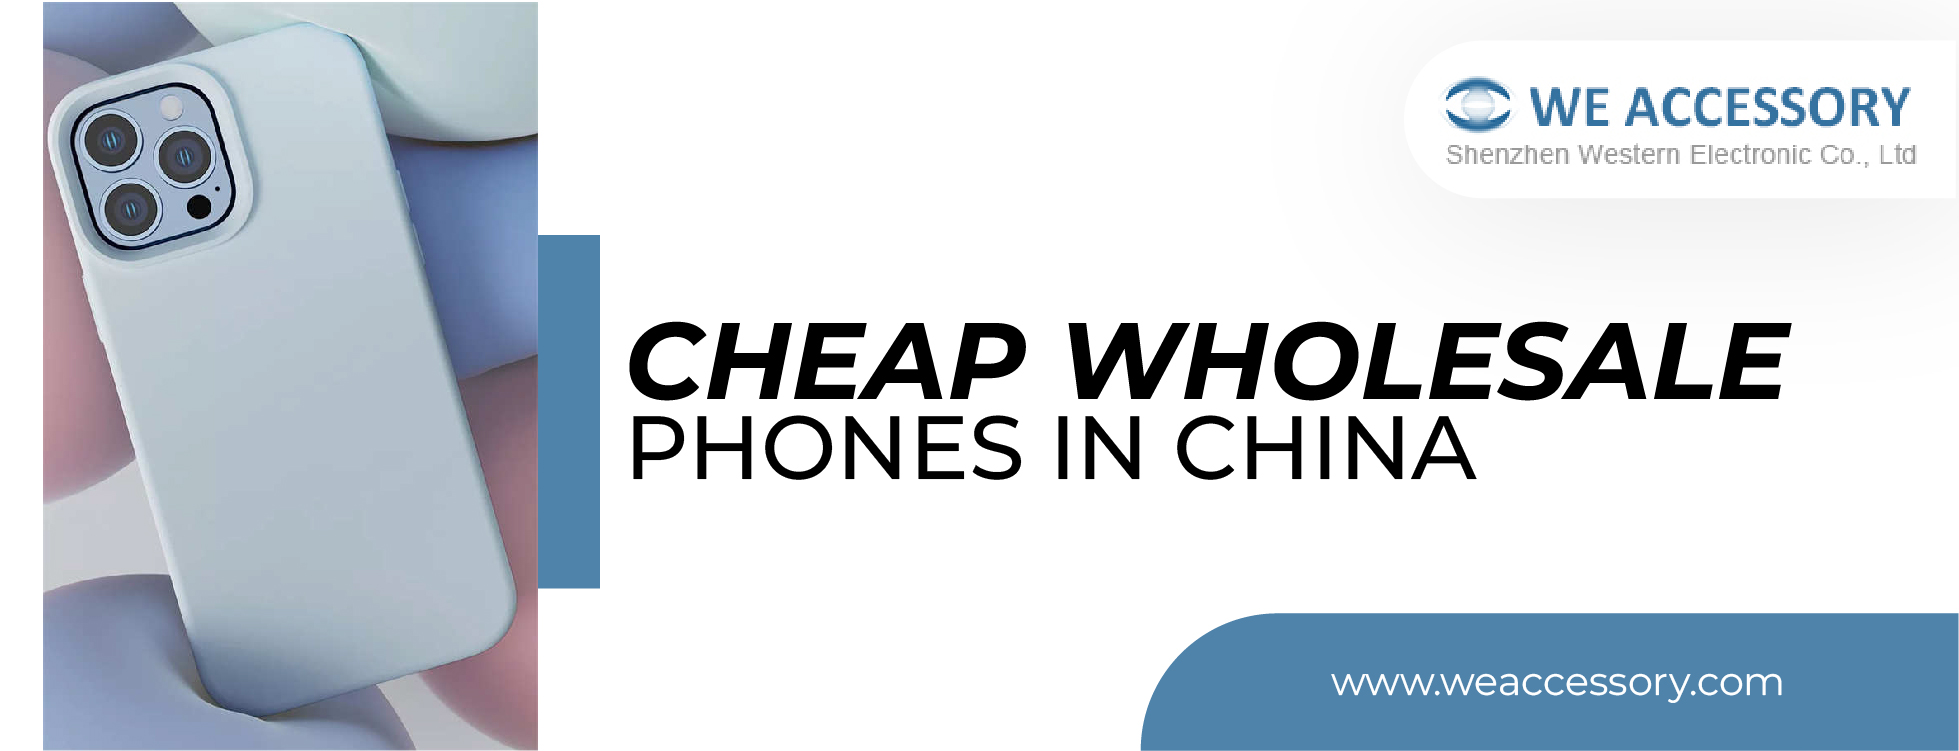 cheap wholesale phones in China